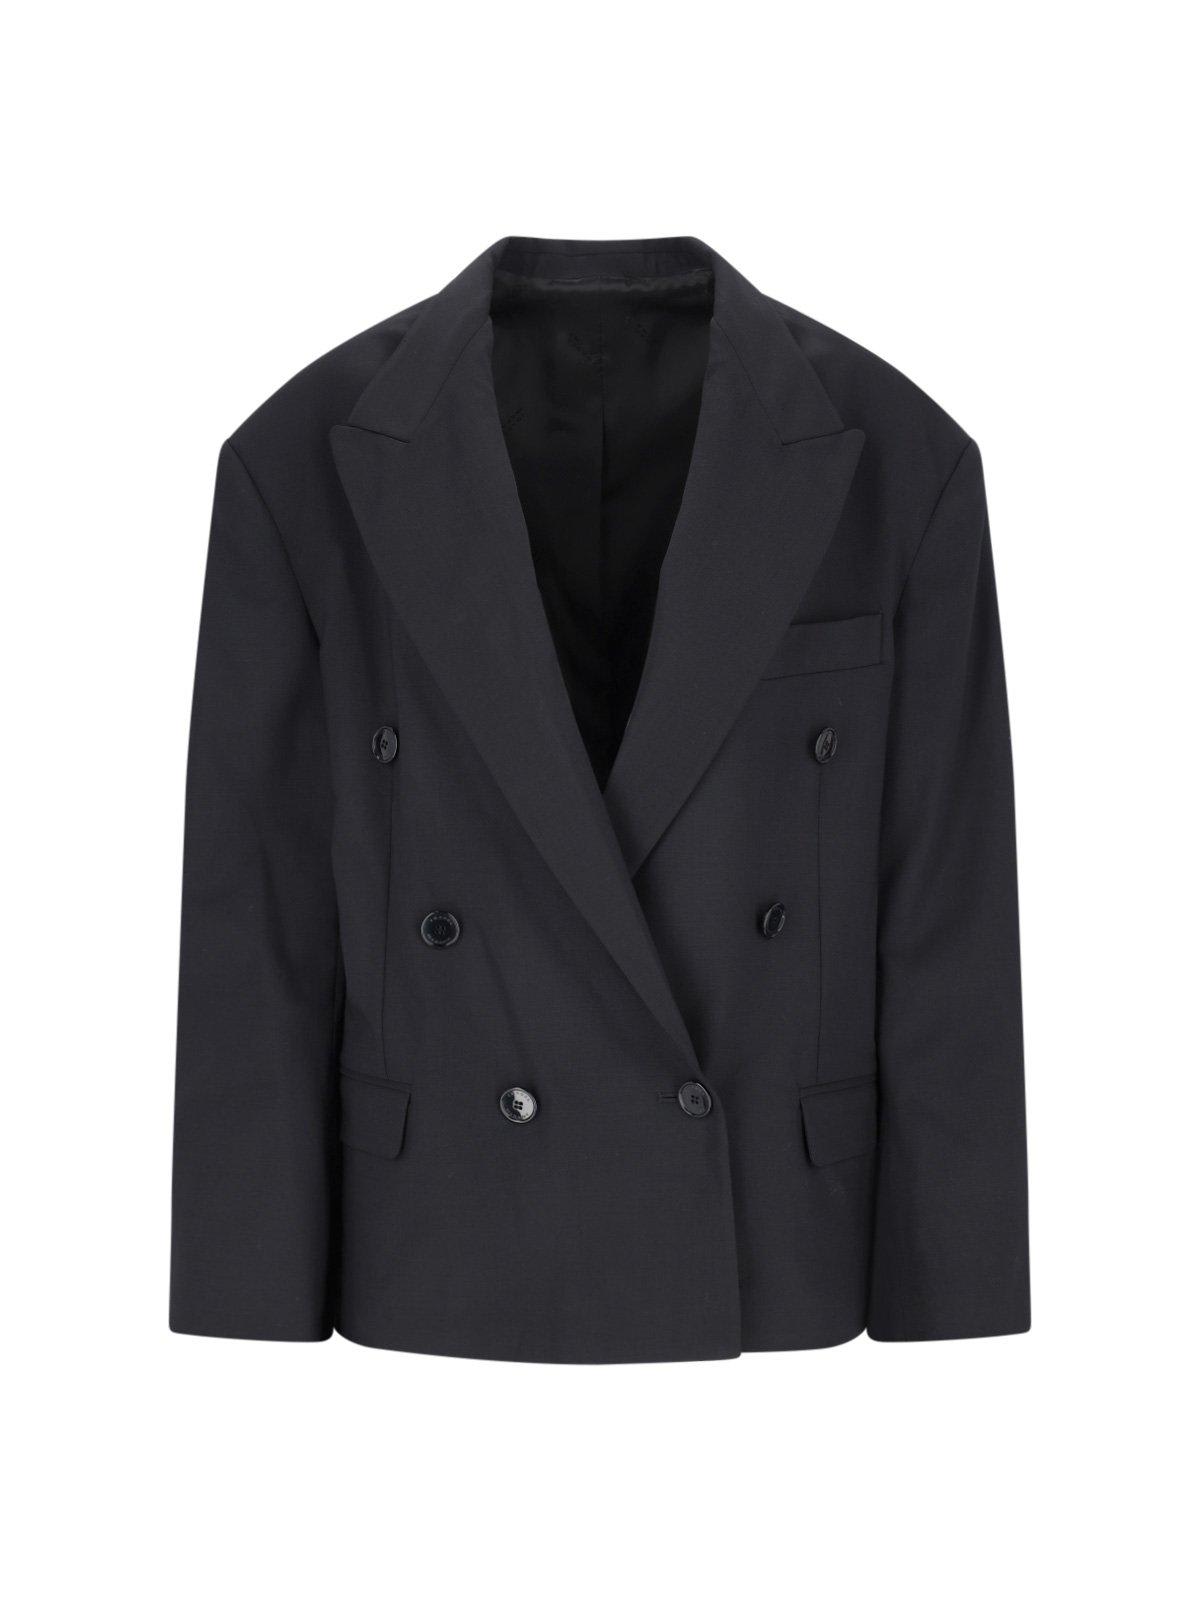 ISABEL MARANT DOUBLE-BREASTED TAILORED BLAZER